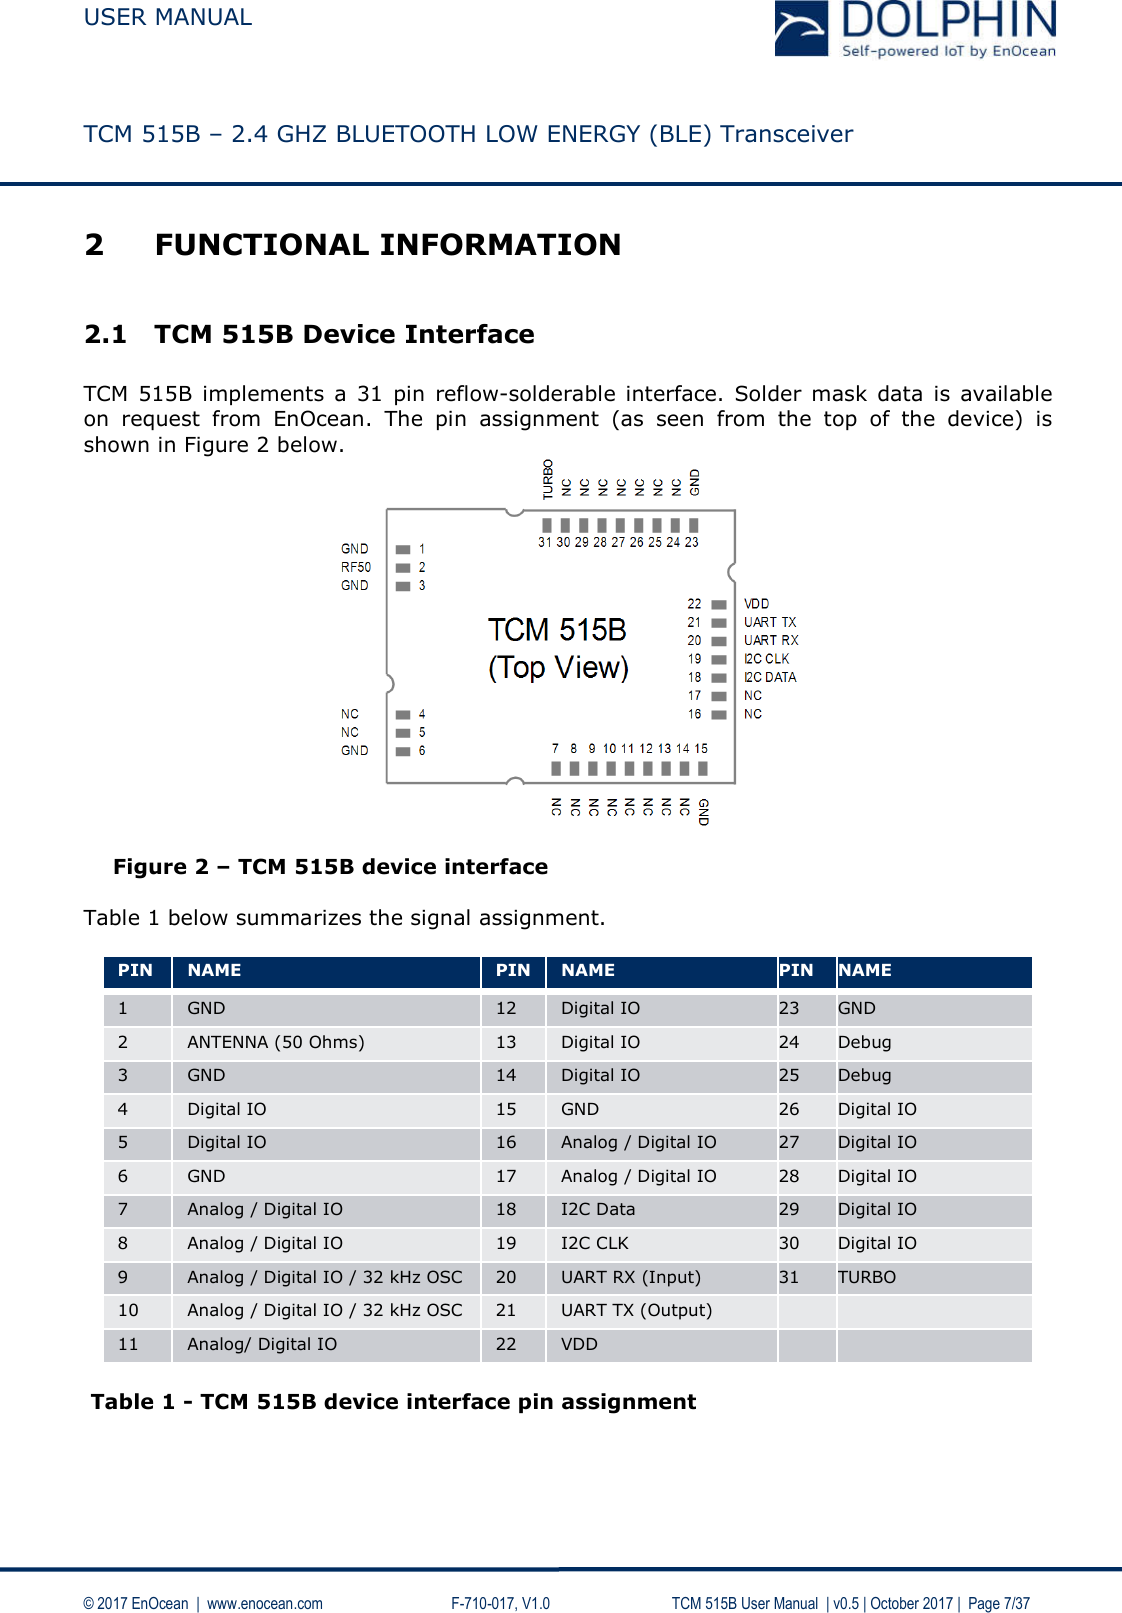  USER MANUAL    TCM 515B – 2.4 GHZ BLUETOOTH LOW ENERGY (BLE) Transceiver   © 2017 EnOcean  |  www.enocean.com     F-710-017, V1.0        TCM 515B User Manual  | v0.5 | October 2017 |  Page 7/37 2 FUNCTIONAL INFORMATION  2.1 TCM 515B Device Interface  TCM  515B implements  a  31  pin  reflow-solderable  interface. Solder  mask  data  is available on  request  from  EnOcean.  The  pin  assignment  (as  seen  from  the  top  of  the  device)  is shown in Figure 2 below.   Figure 2 – TCM 515B device interface  Table 1 below summarizes the signal assignment.  PIN  NAME  PIN  NAME  PIN  NAME  1   GND   12   Digital IO  23   GND 2  ANTENNA (50 Ohms)  13   Digital IO  24   Debug  3  GND  14  Digital IO  25  Debug 4  Digital IO  15  GND   26   Digital IO 5  Digital IO  16   Analog / Digital IO  27  Digital IO 6  GND  17   Analog / Digital IO  28   Digital IO 7   Analog / Digital IO  18  I2C Data  29  Digital IO 8   Analog / Digital IO  19  I2C CLK   30  Digital IO 9  Analog / Digital IO / 32 kHz OSC  20   UART RX (Input)  31   TURBO 10  Analog / Digital IO / 32 kHz OSC  21   UART TX (Output)     11  Analog/ Digital IO  22  VDD       Table 1 - TCM 515B device interface pin assignment       